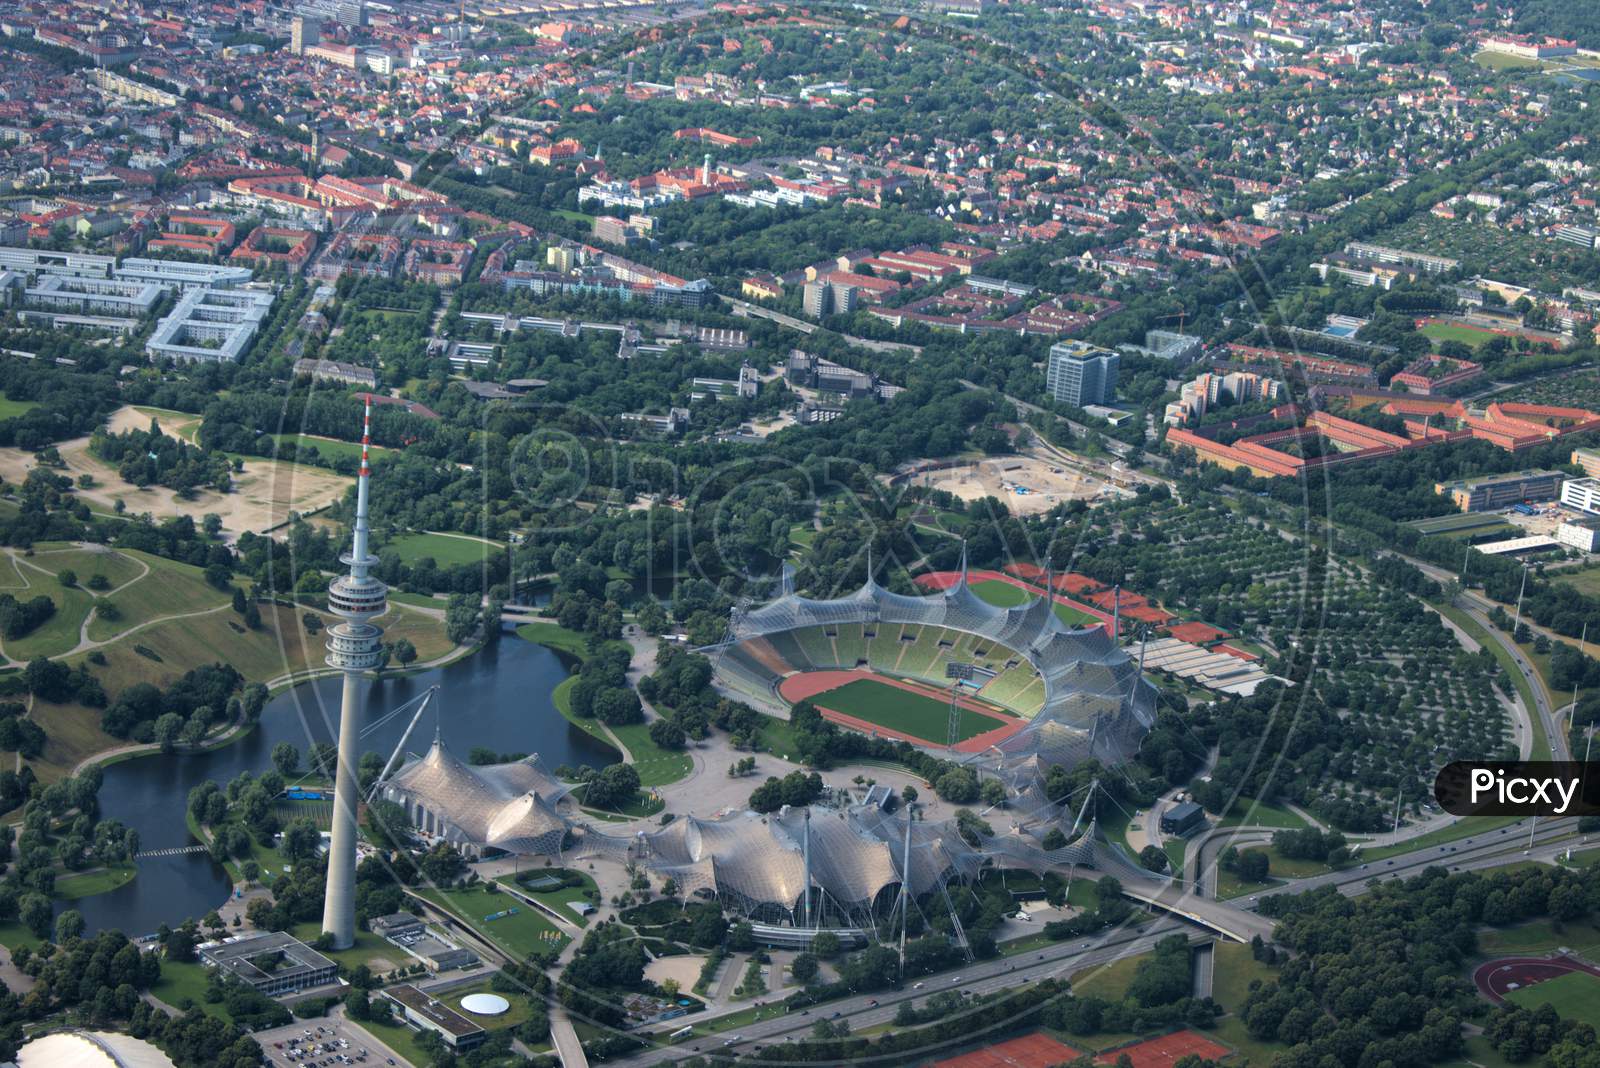 Olympic stadium in Munich from above 5.7.2020